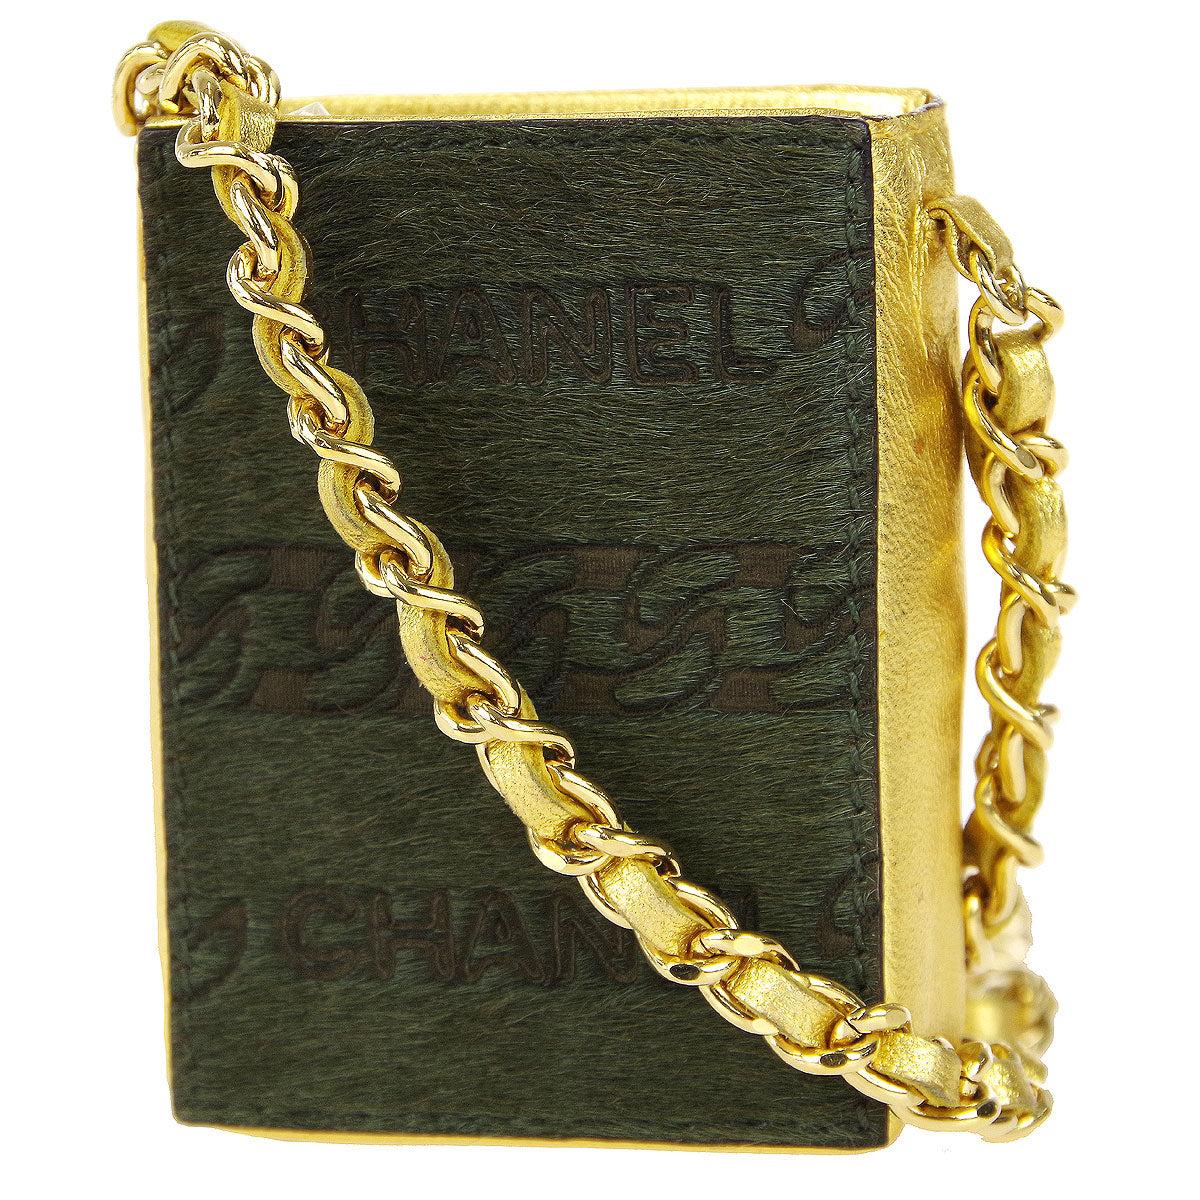 Chanel 2001 Cigarette Case Pony Hair in Green